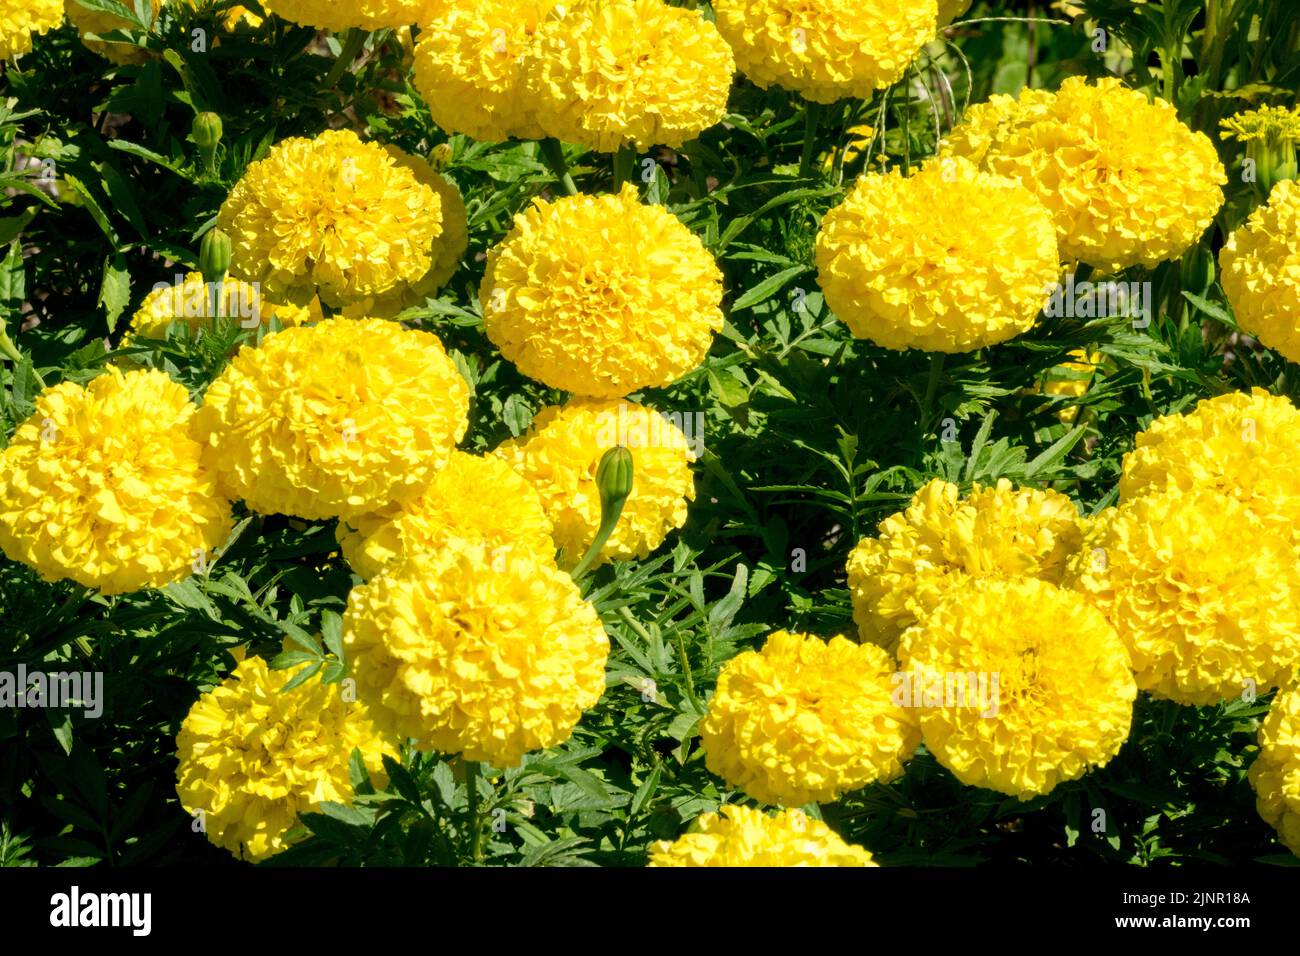 Yellow Marigolds Yellow Tagetes 'Lady First' Bedding Plant Tagetes erecta African marigold Blooming Flower bed Flowers Blooming August Flowering Stock Photo